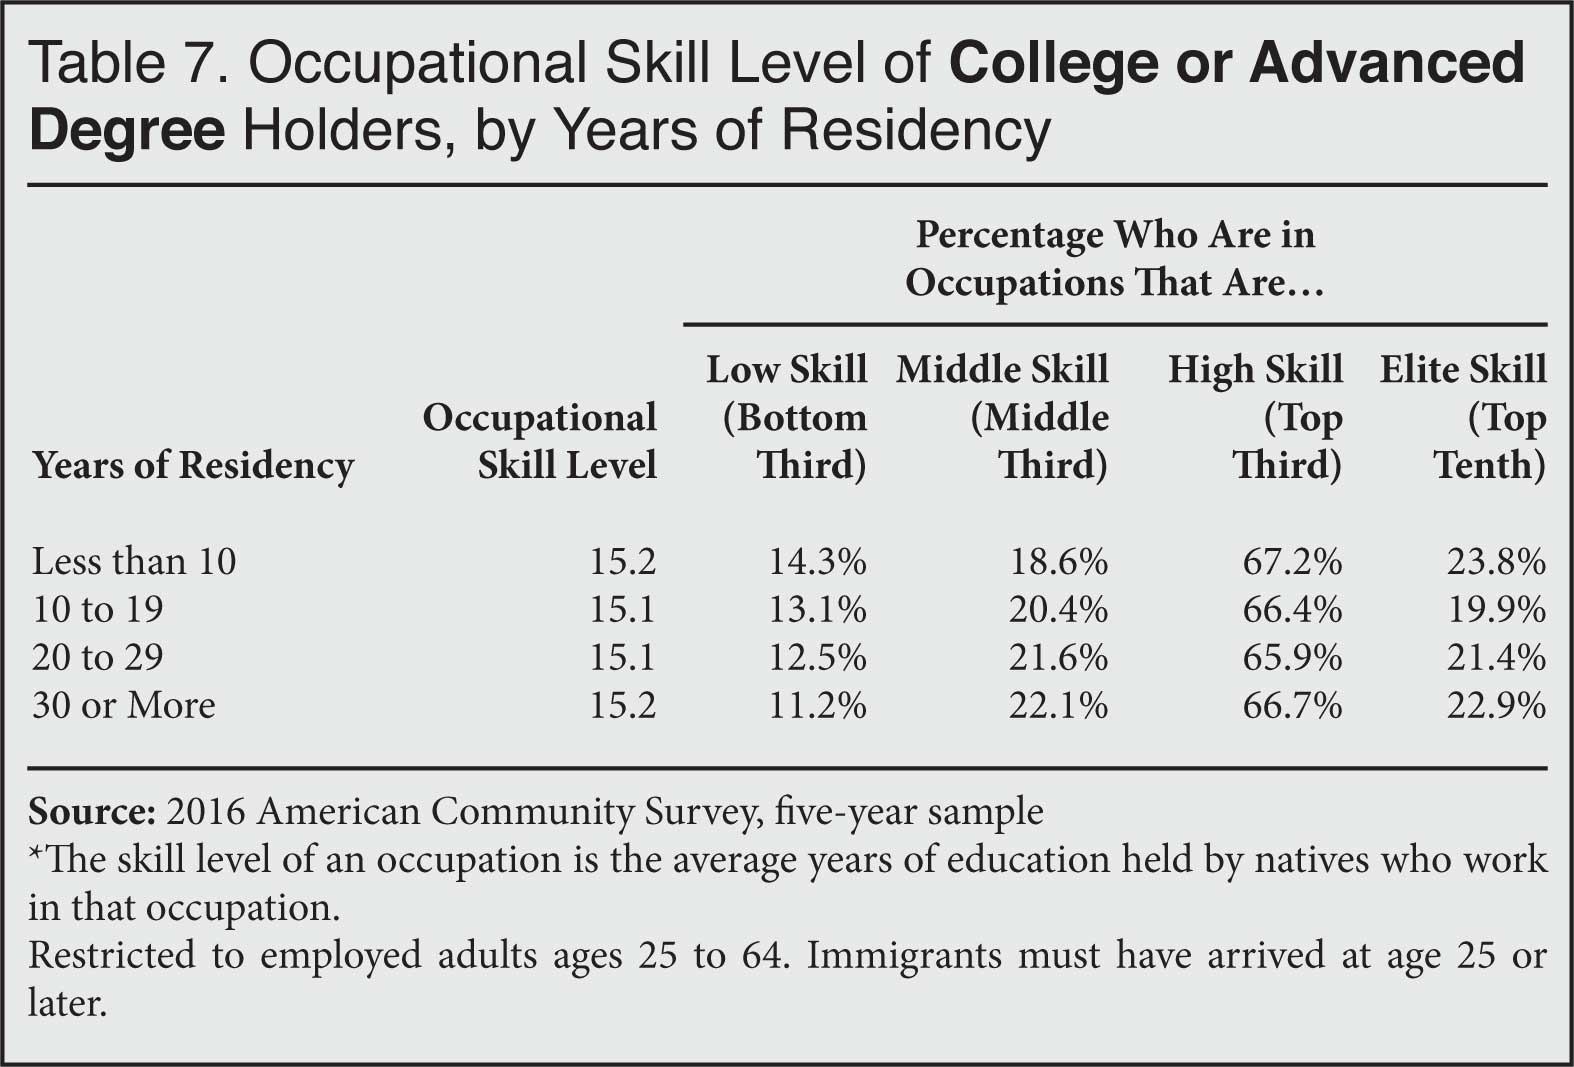 Table: Occupational Skill Level of College or Advanced Degree Holders, by Years of Residency 